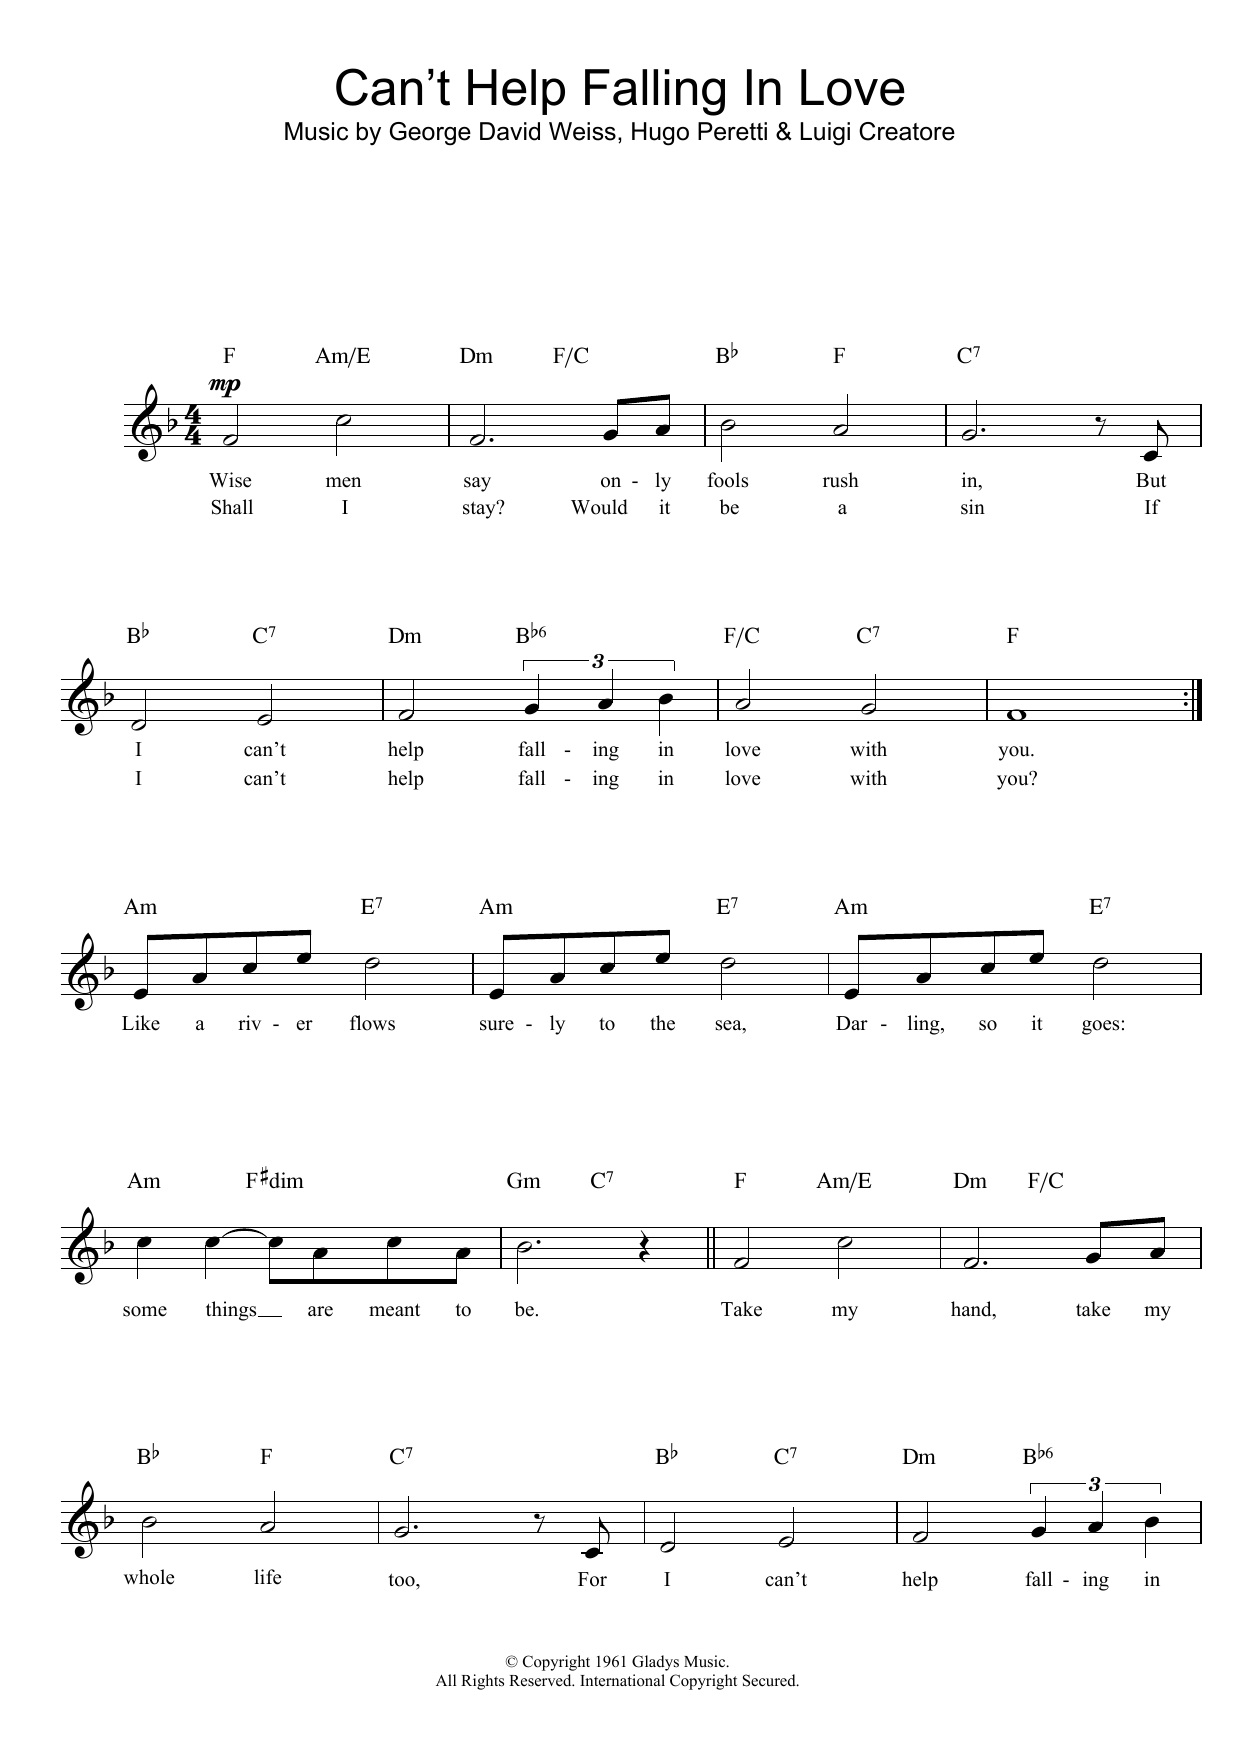 UB40 Can't Help Falling In Love sheet music notes printable PDF score